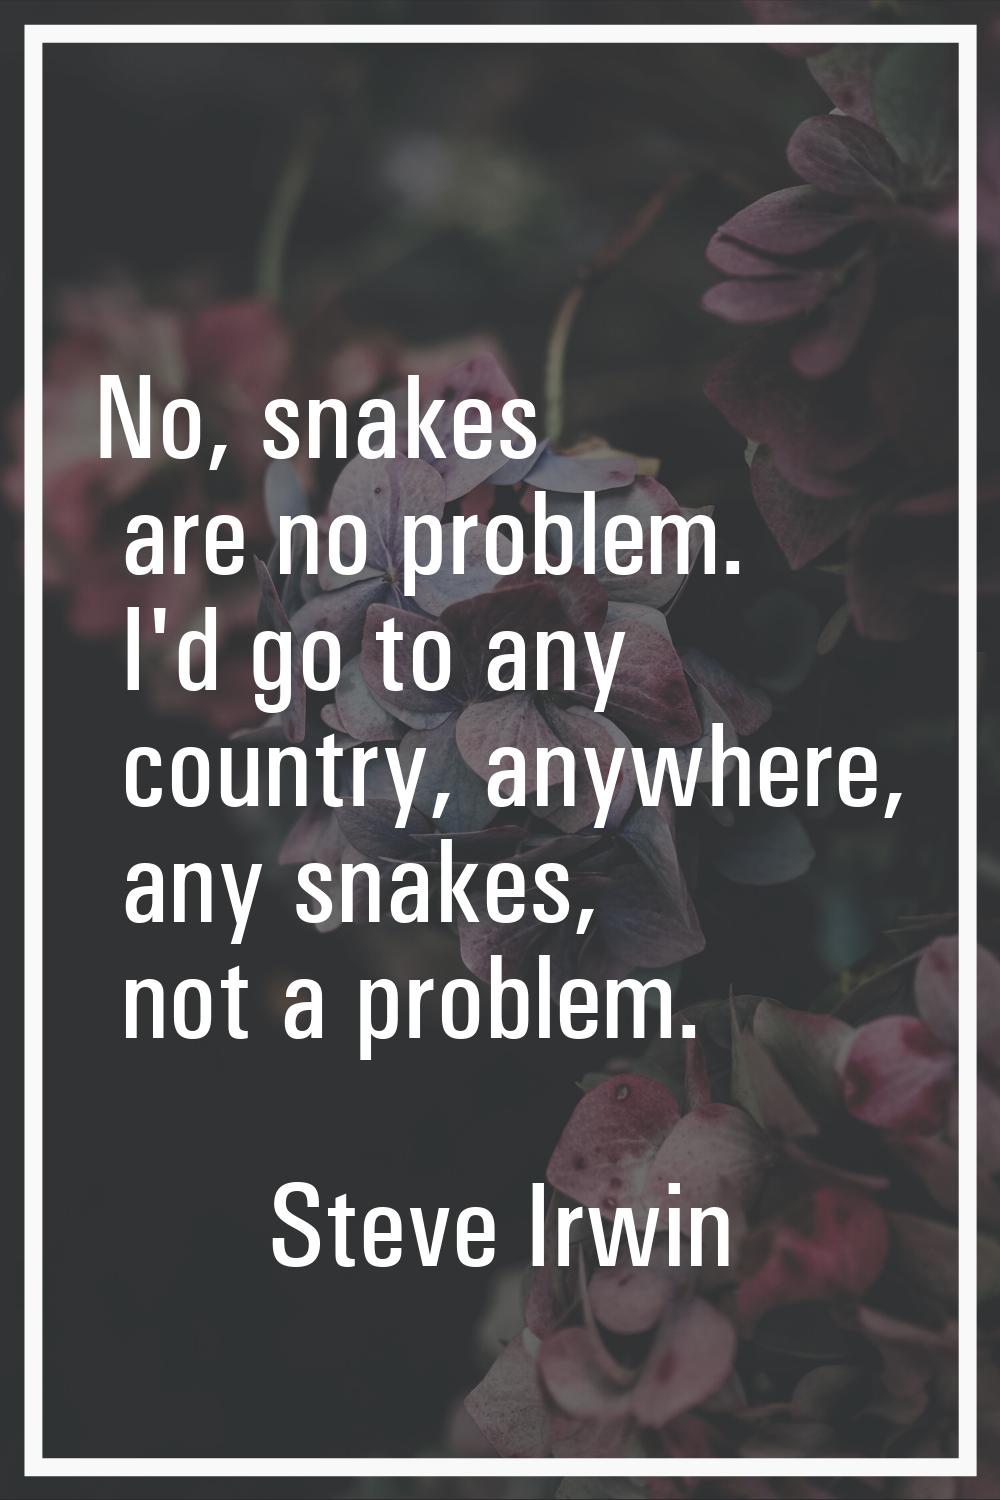 No, snakes are no problem. I'd go to any country, anywhere, any snakes, not a problem.